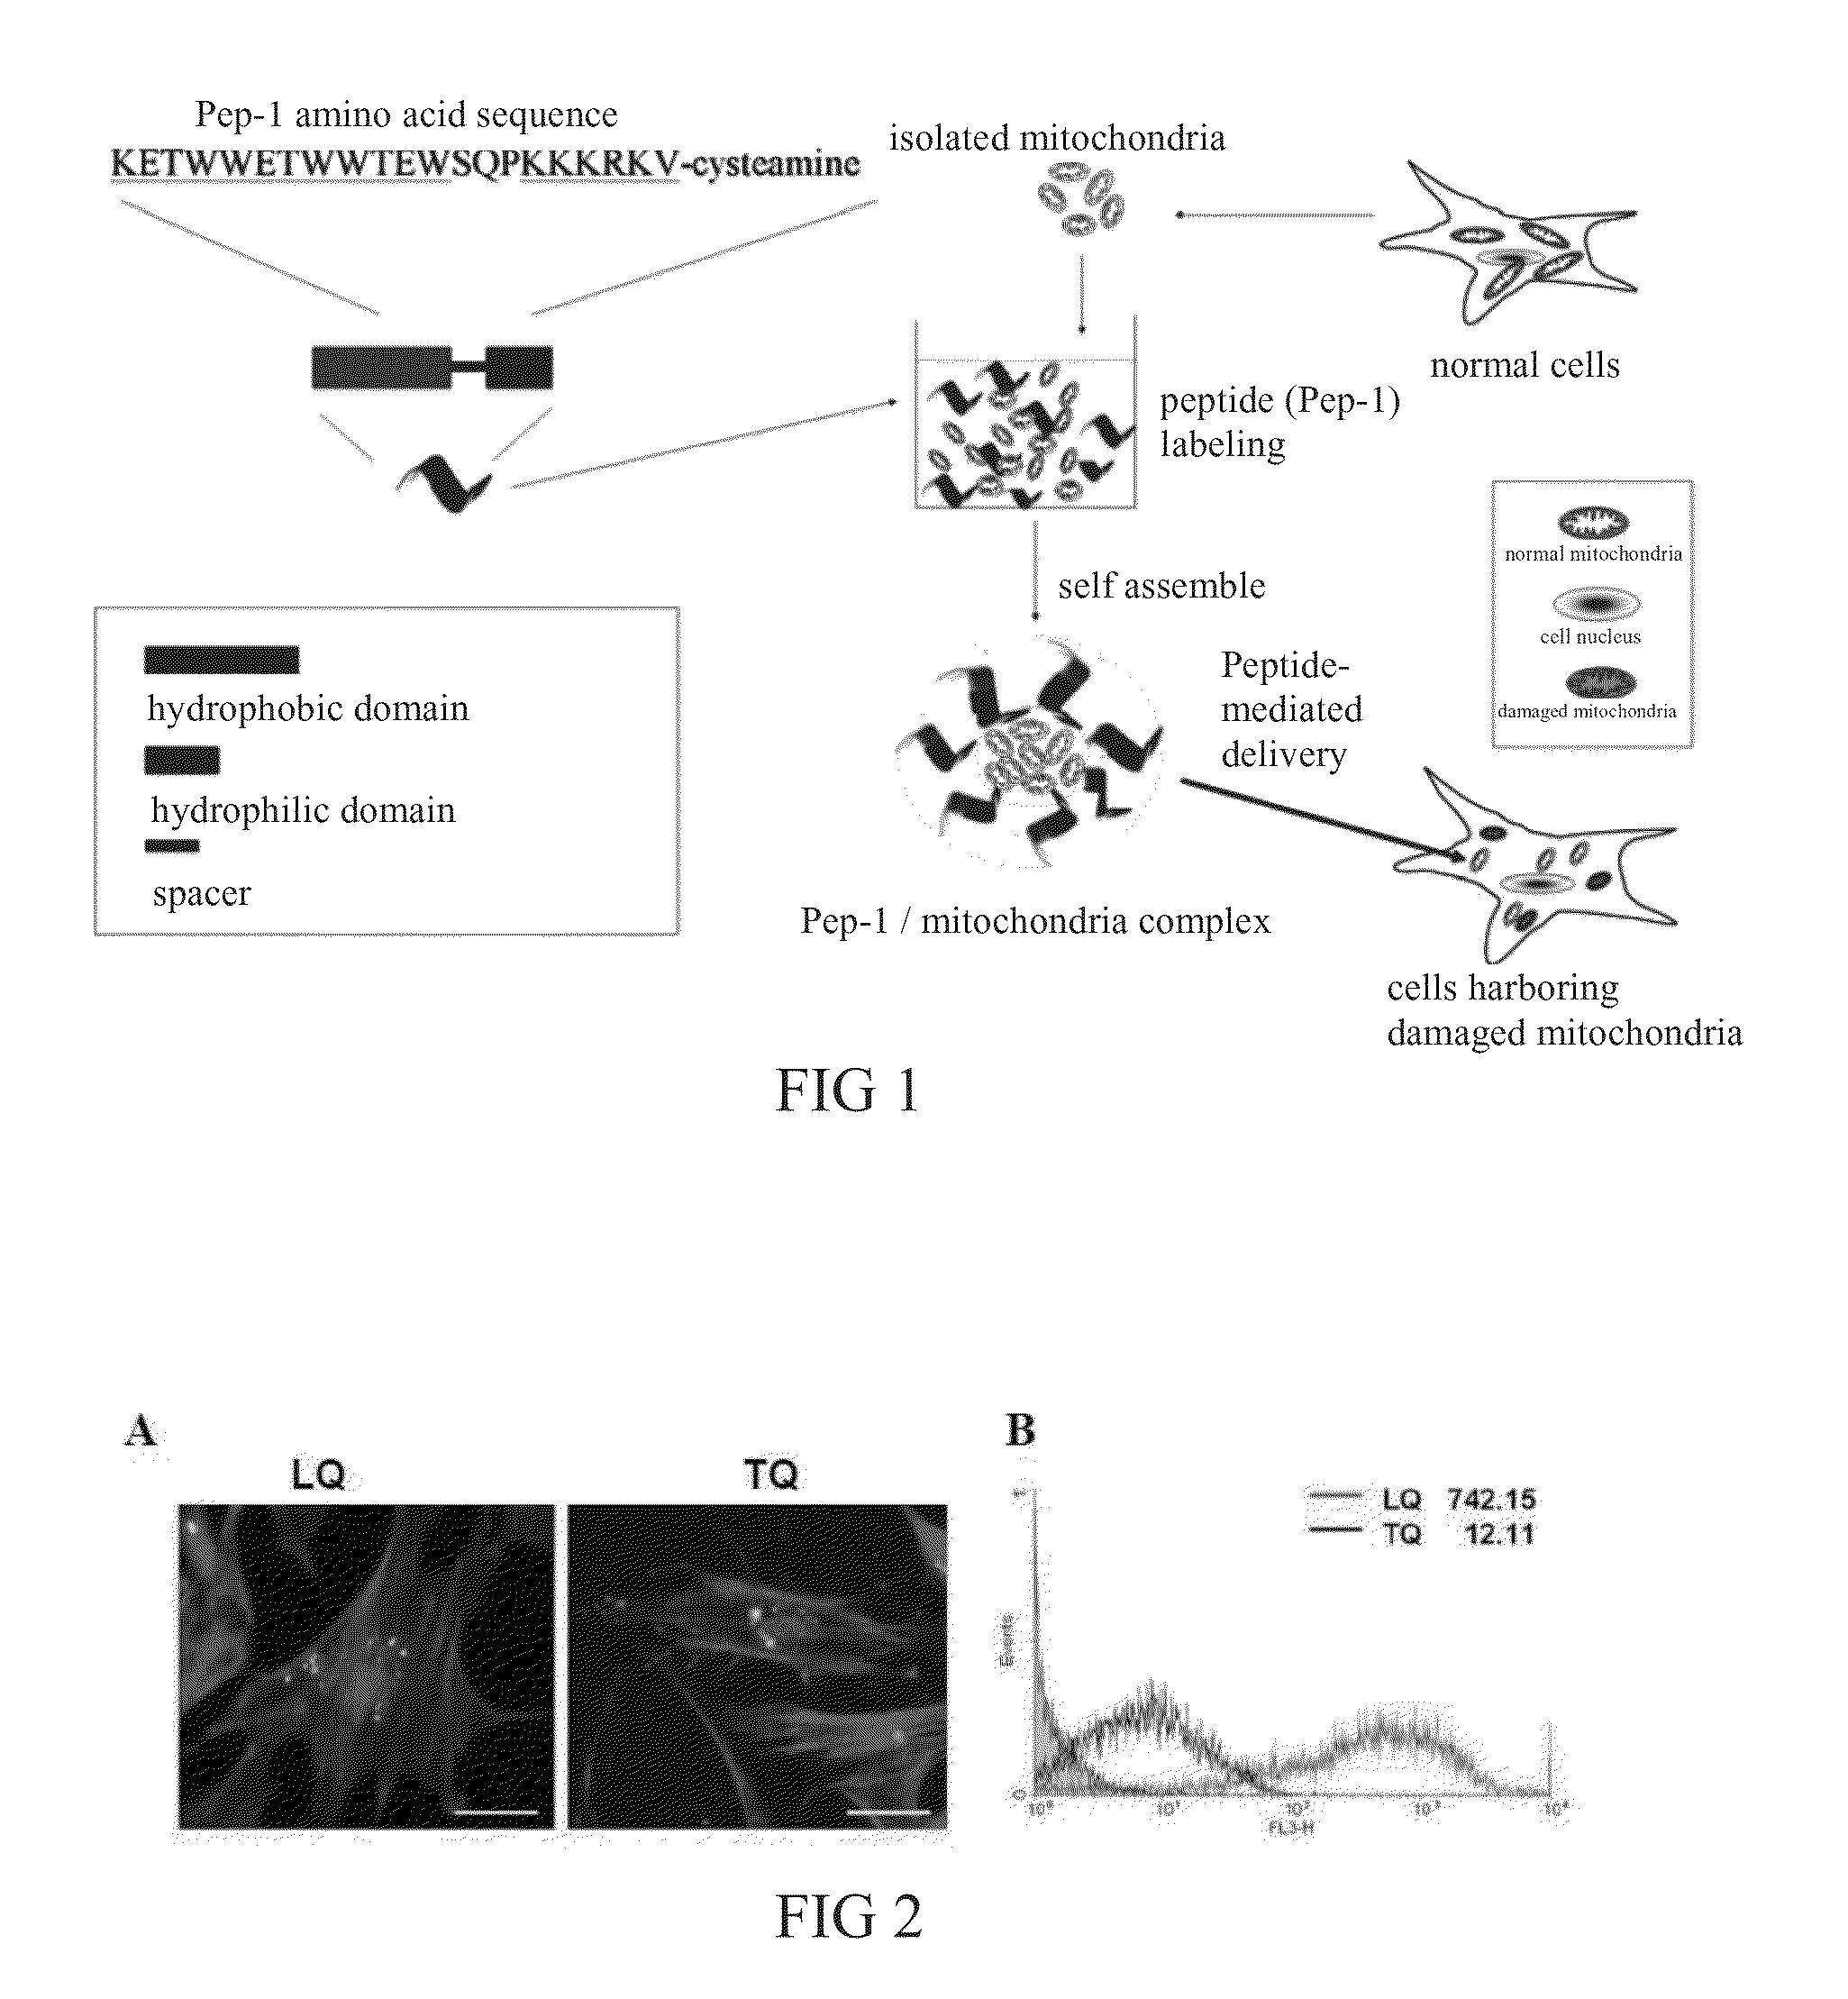 Method and Applications of Peptide-Mediated Mitochondrial Delivery System